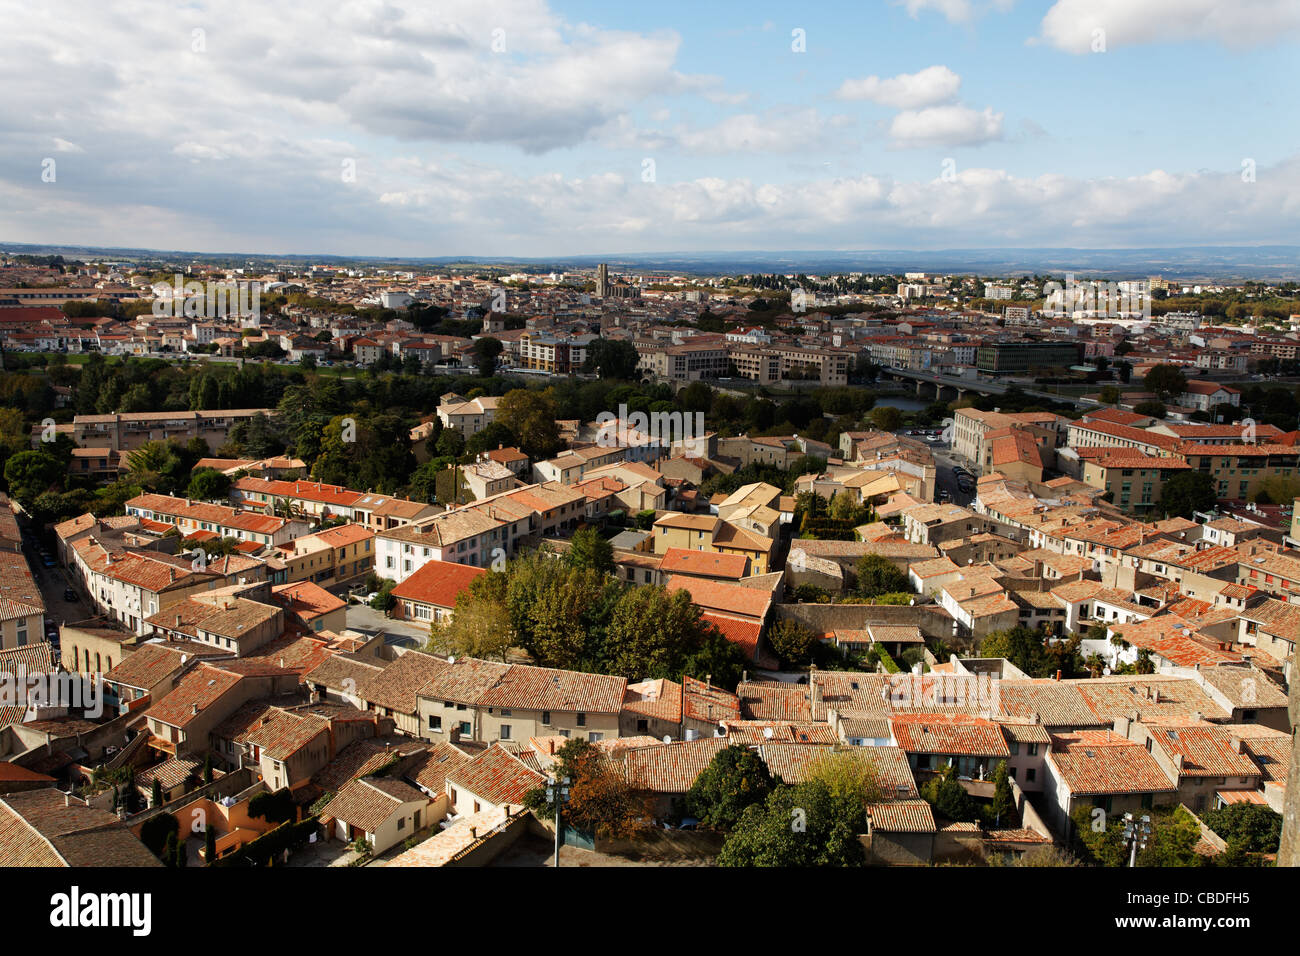 Aerial view of the base city of Carcassonne in Aude department of France, seen form the walled city. Stock Photo